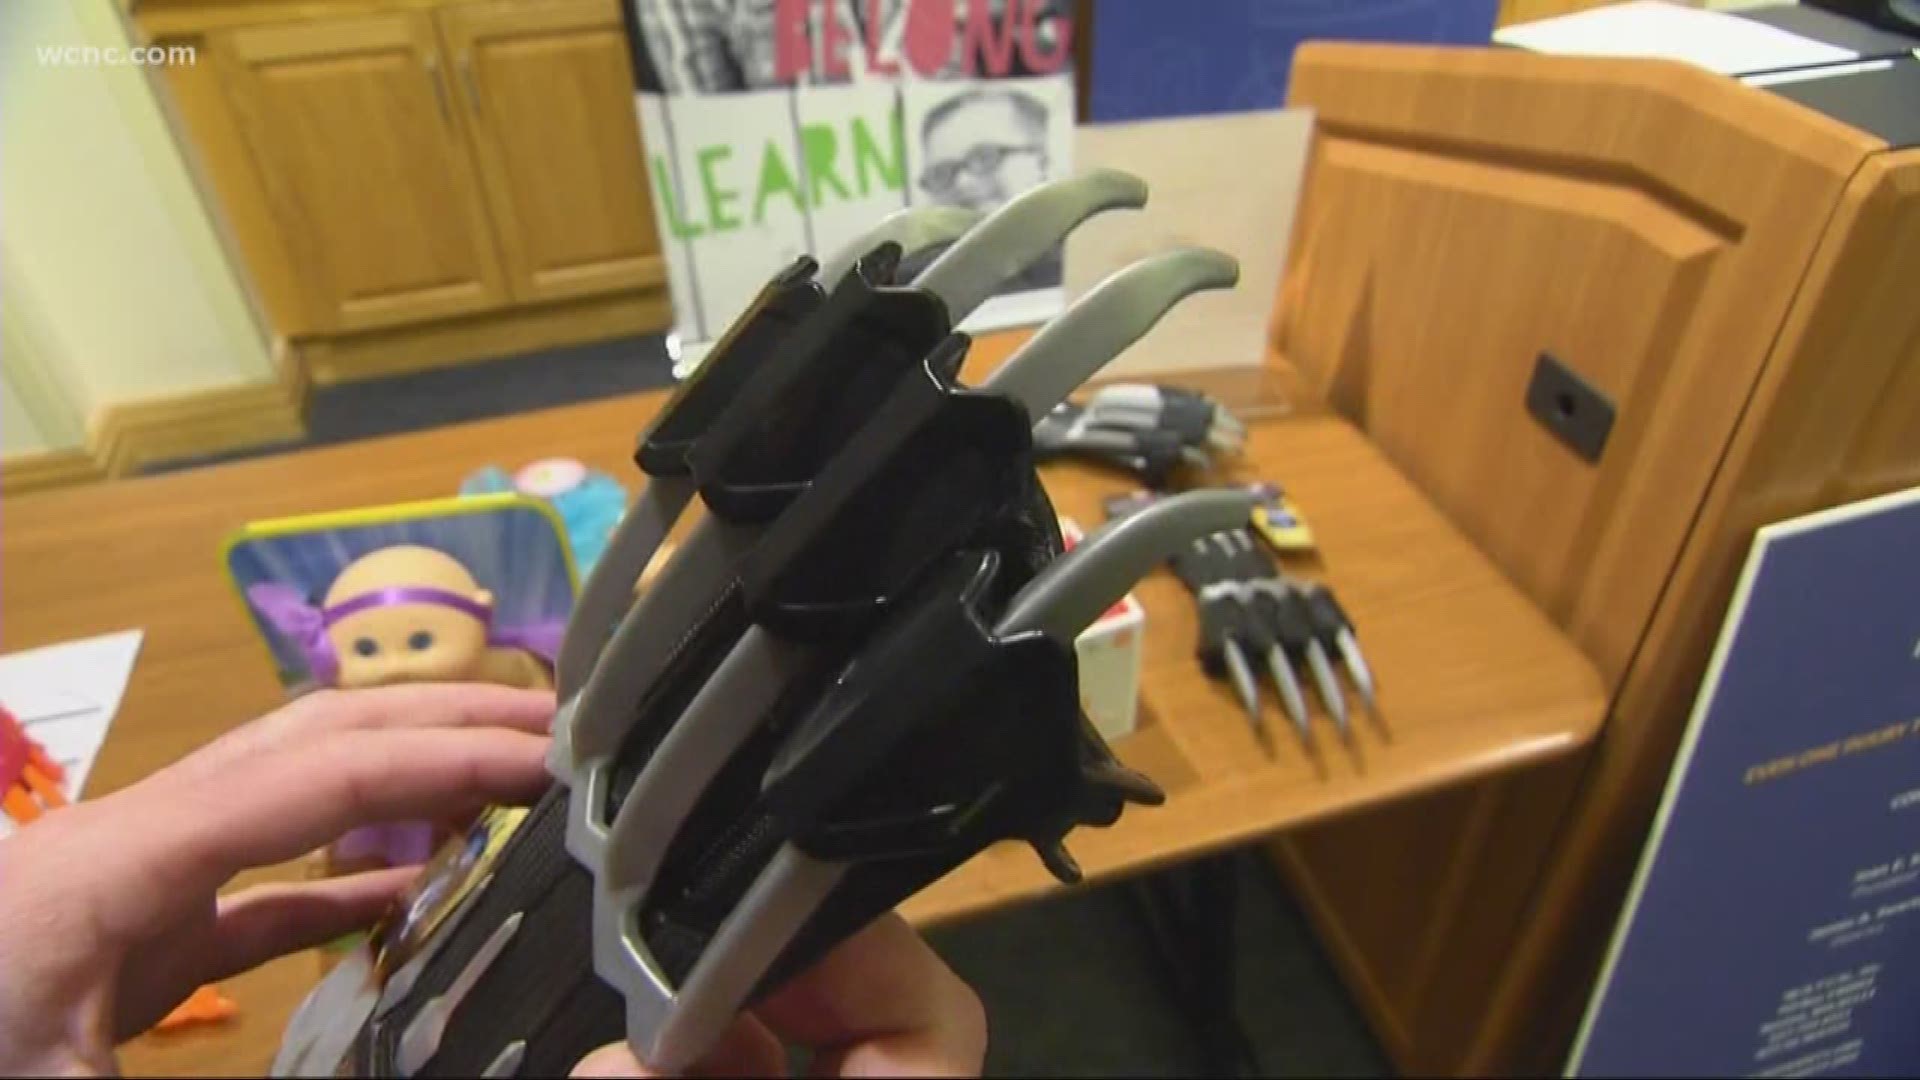 The toys include a Nerf gun and a slash claw, which officials say could send your kids to the hospital.